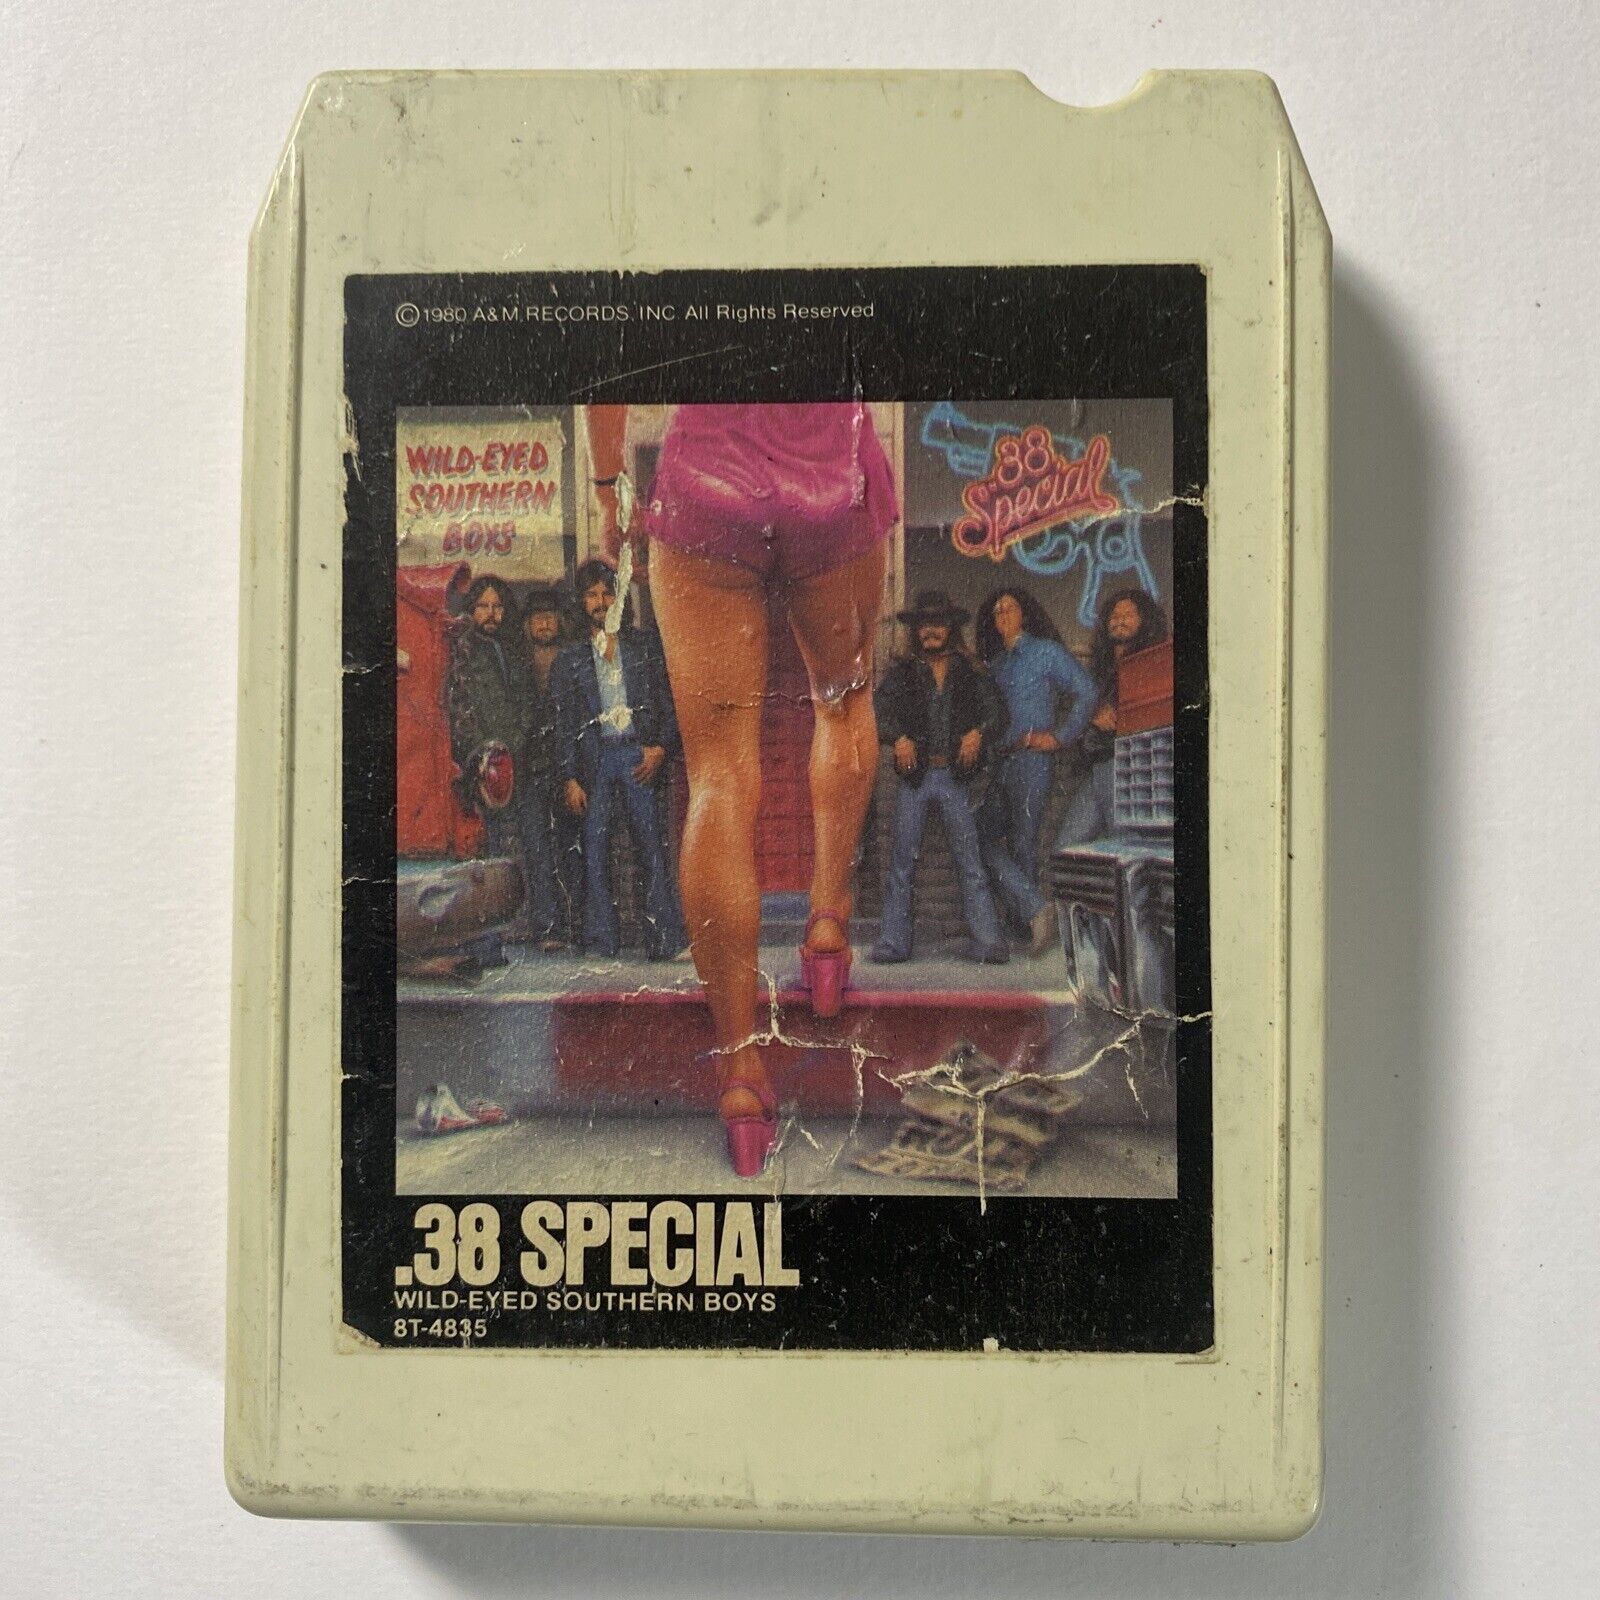 38 Special "Wild-Eyed Southern Boy" 8 Track Tape (Vintage 1980 8T-4835)